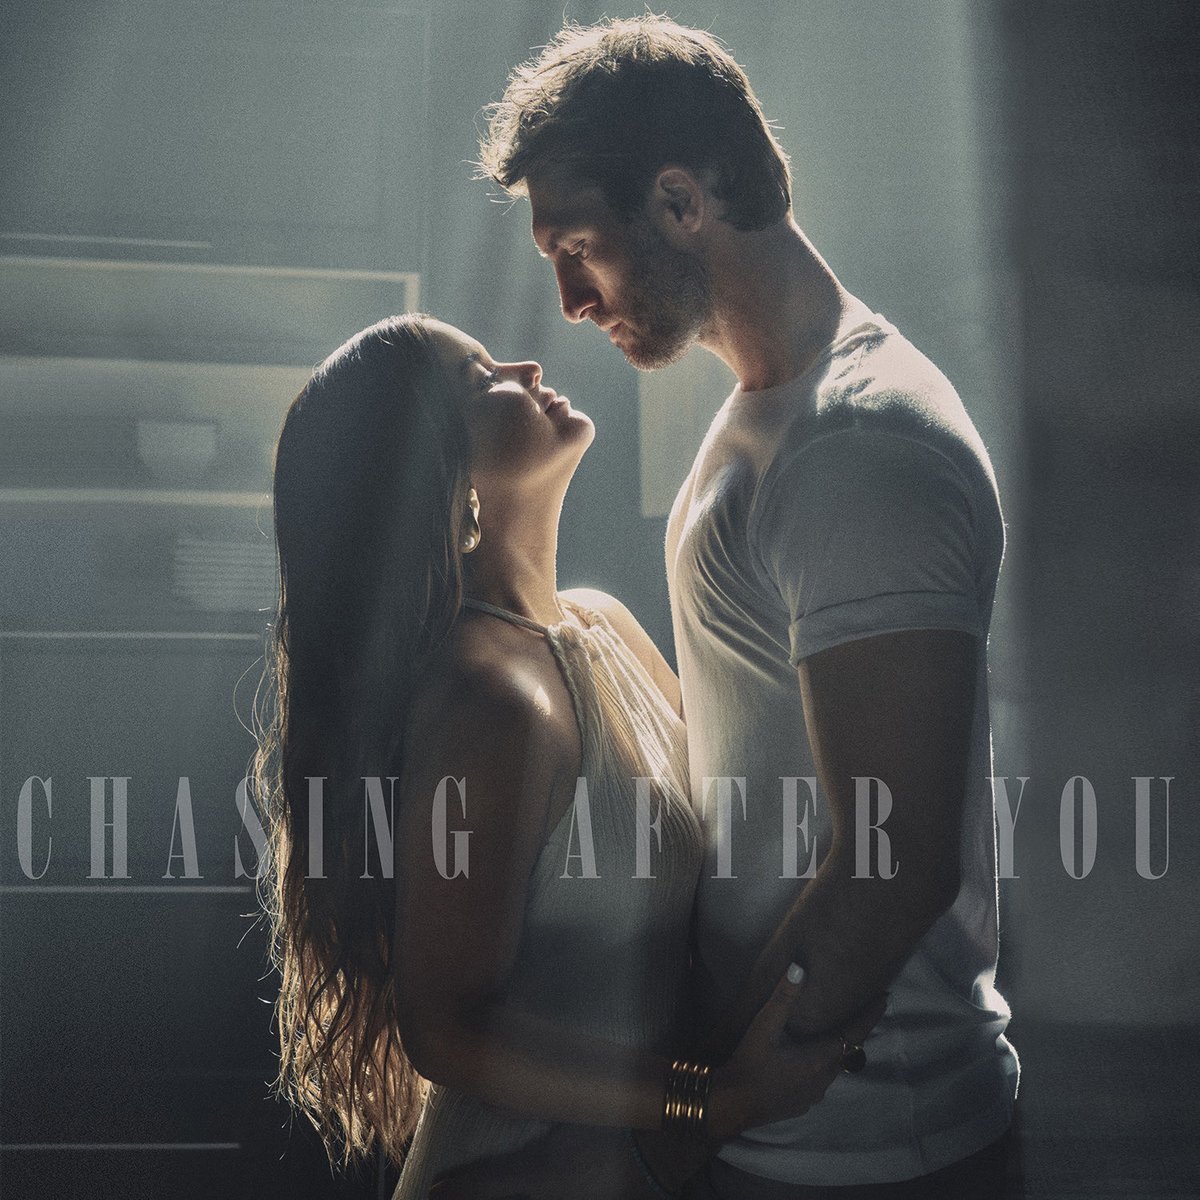 .@MarenMorris & @RyanHurd will release their new collaboration #ChasingAfterYou on Friday, February 12th.